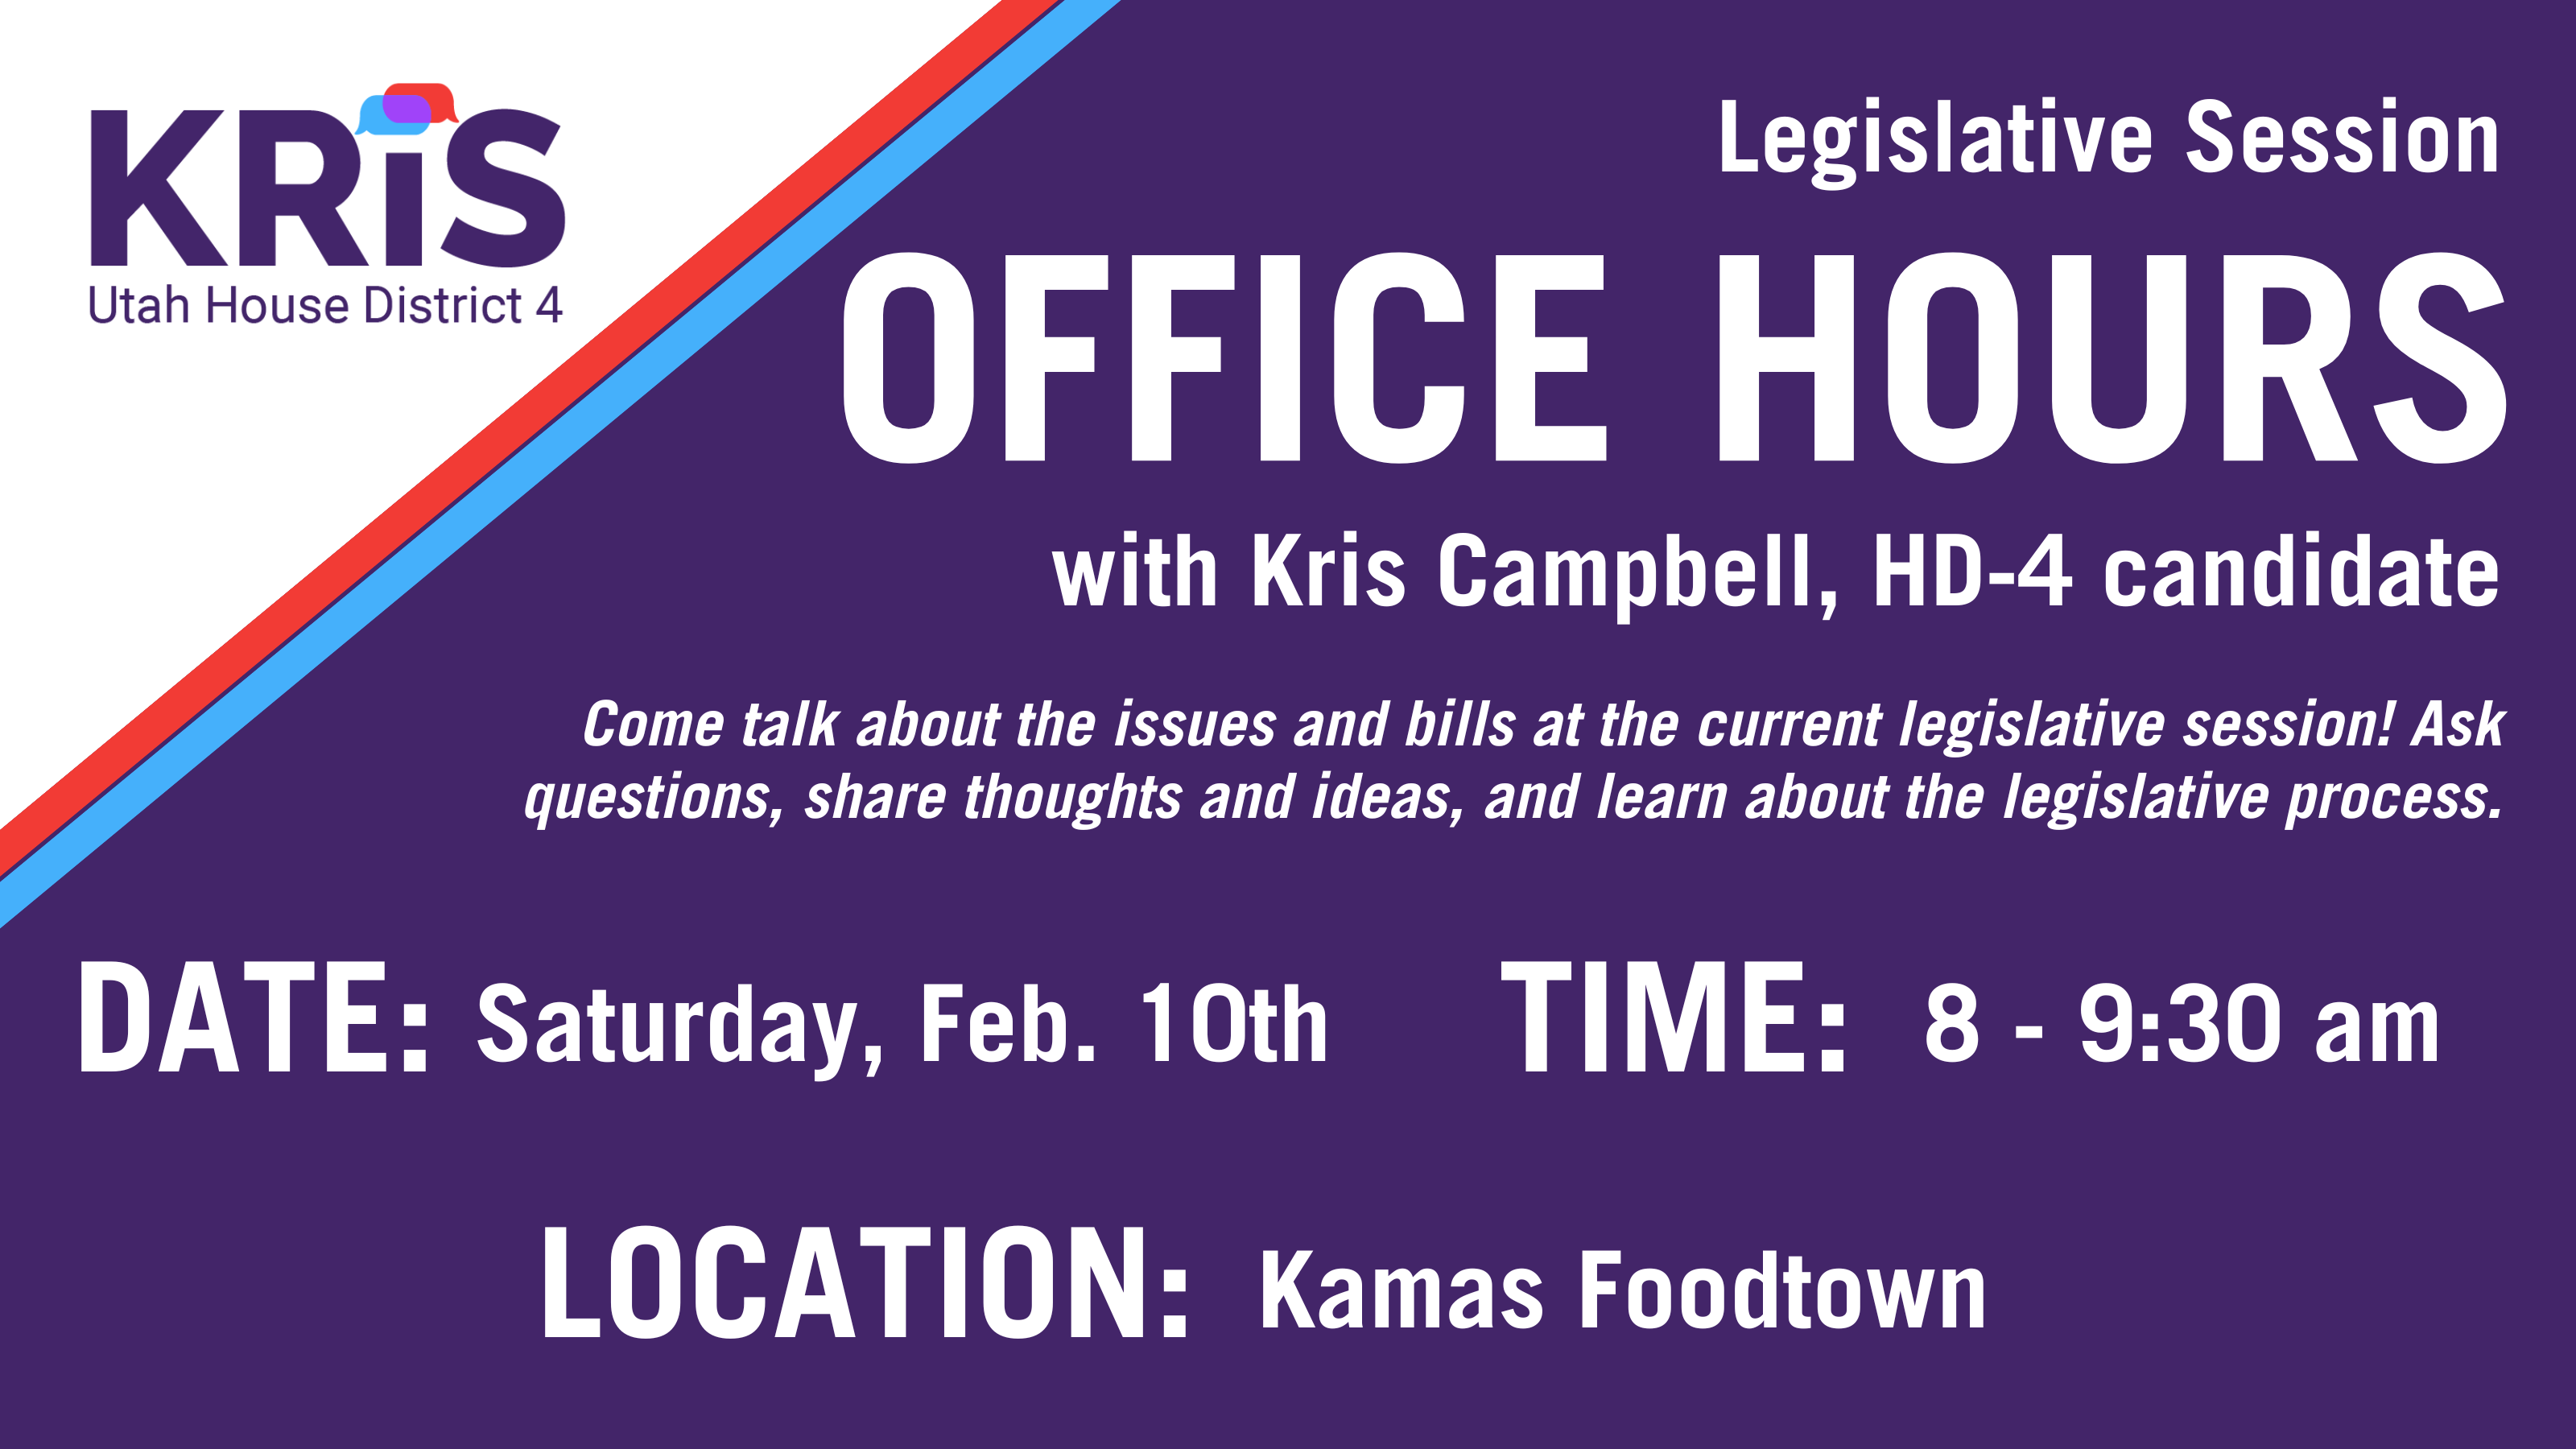 Legislative Session Office Hours with Kris Campbell, HD 4 Candidate. Friday, Feb 10th, from 8-9:30 am at the Kamas Food Town